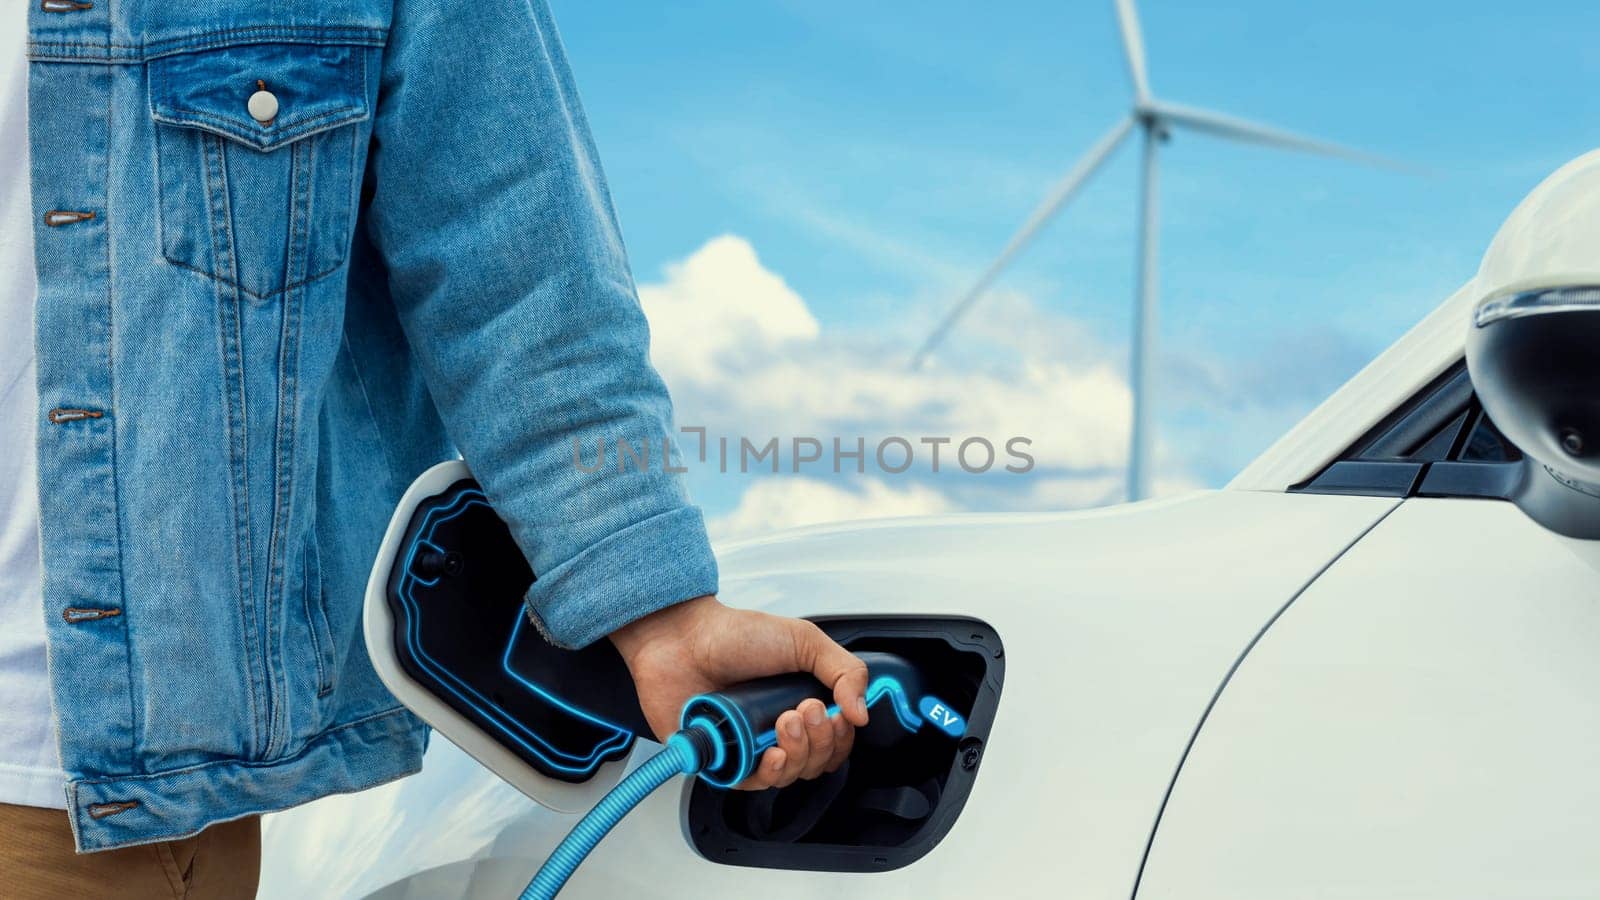 Hand insert EV charger and recharge electric car from charging station with wind turbine generator background. Smart eco-friendly EV car. Technological advancement of alternative energy. Peruse